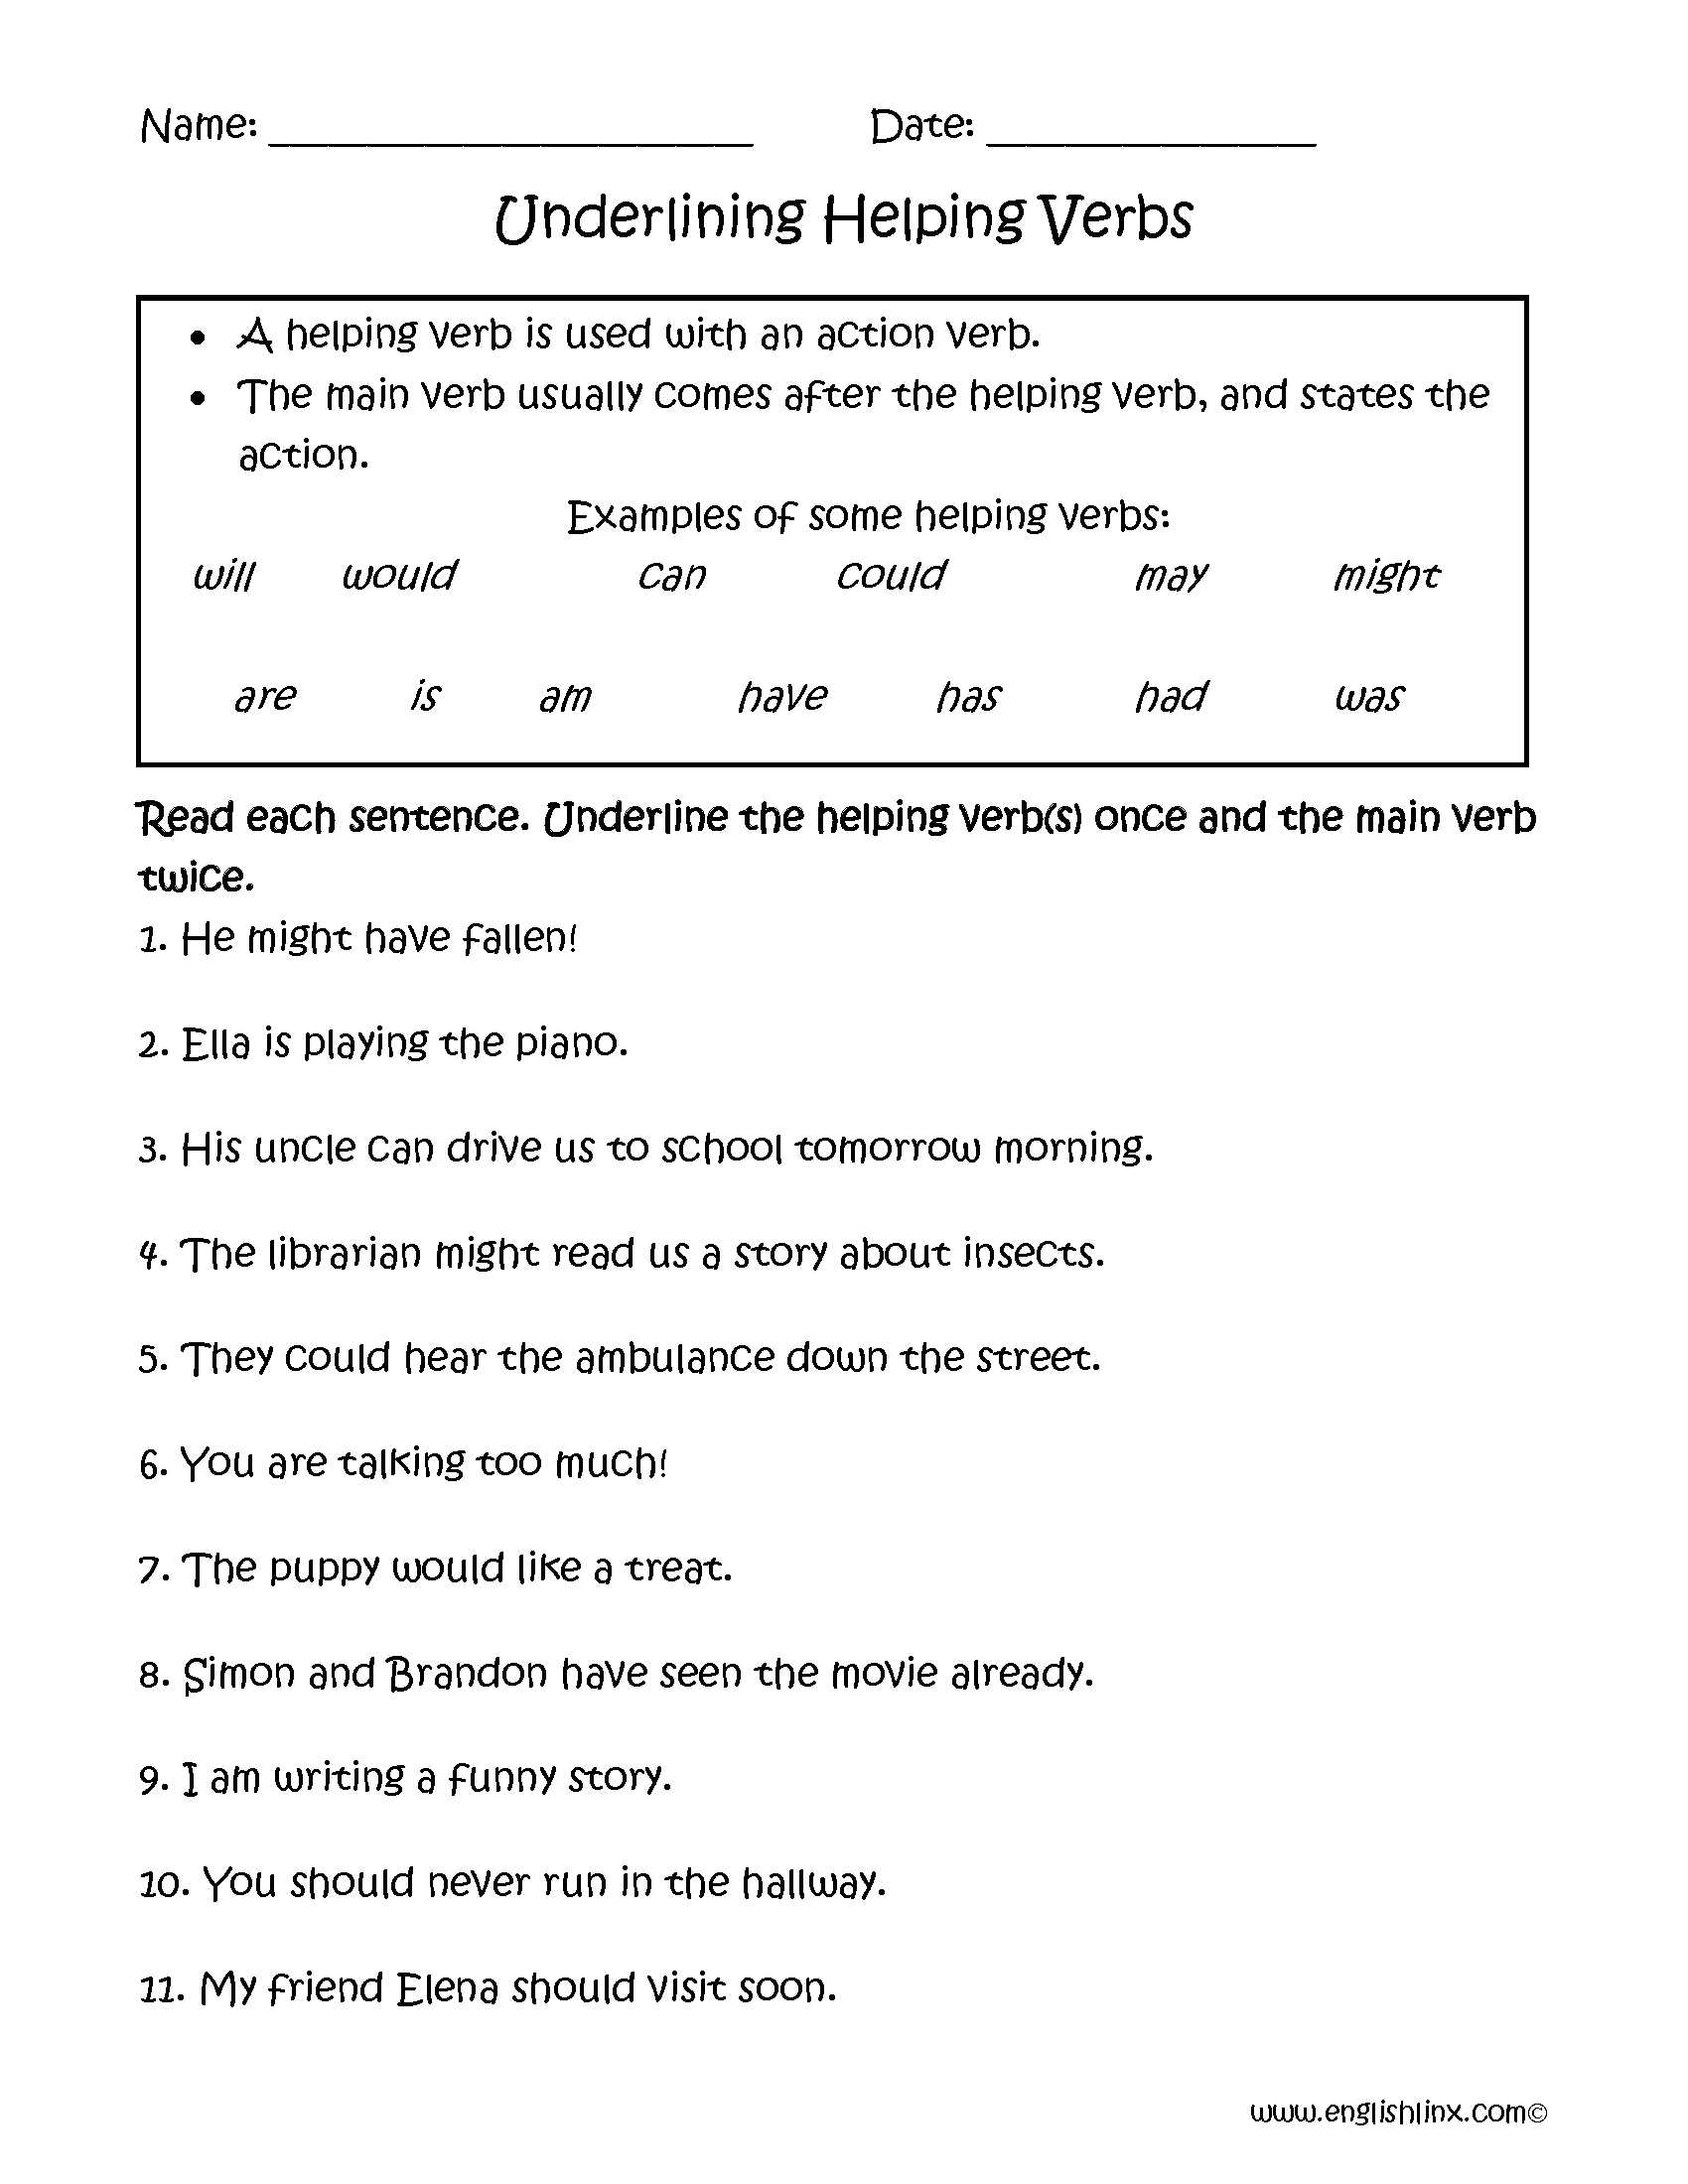 Verbs Worksheets for Grade 1 Along with Verbs Worksheets